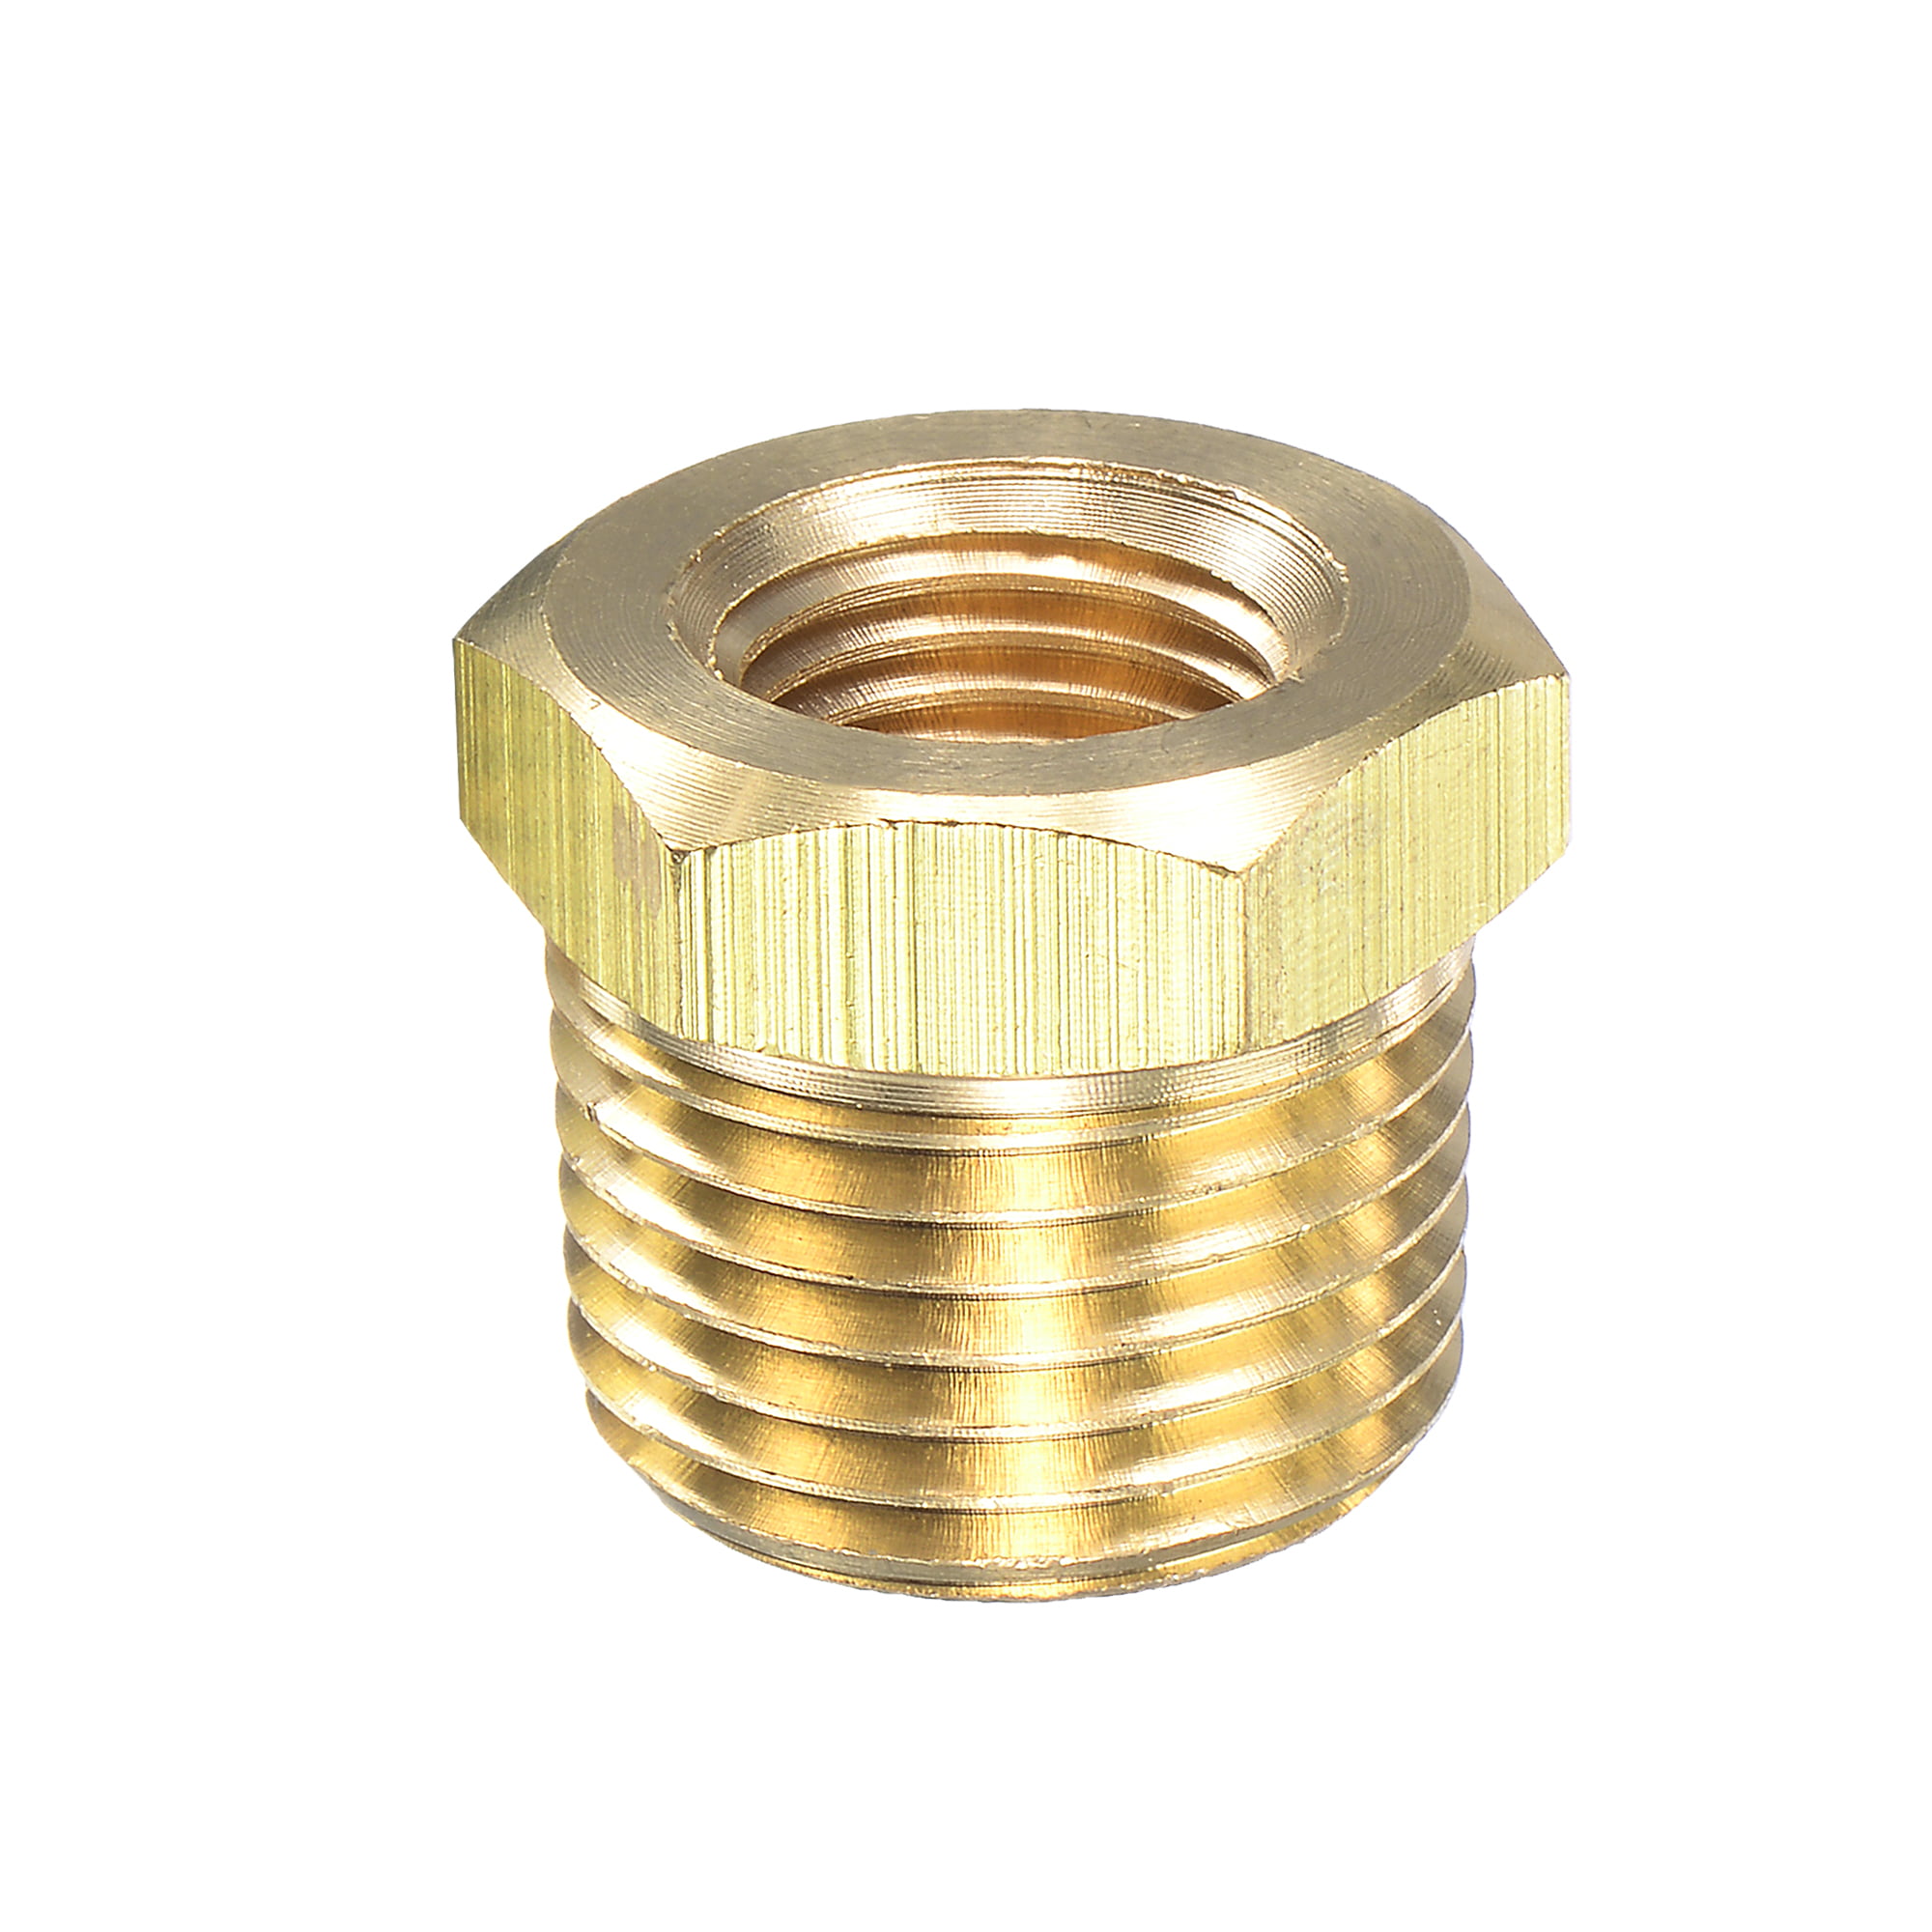 Adapter Brass Pipe Fitting Male Pipe Thread x Female Pipe Thread NPT 